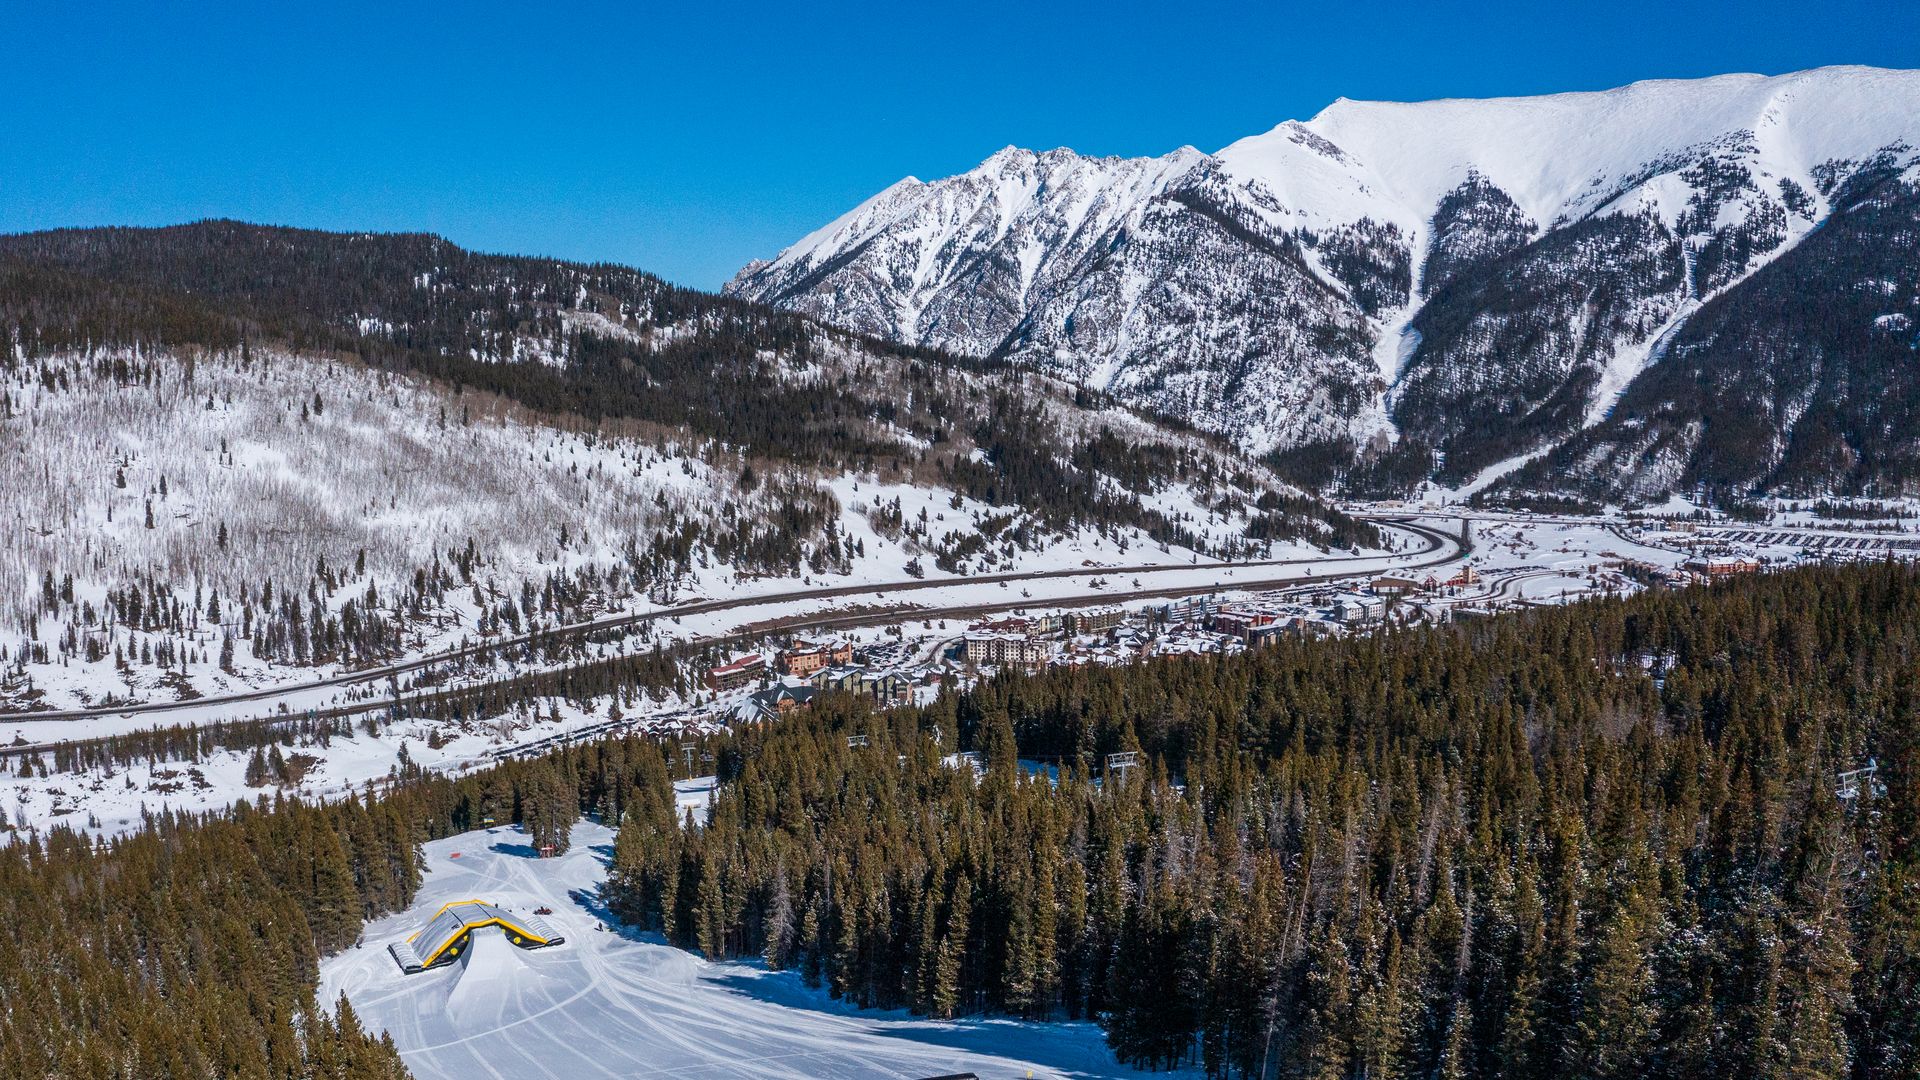 The freestyle skiing training course at Copper Mountain. Photo courtesy of Powdr